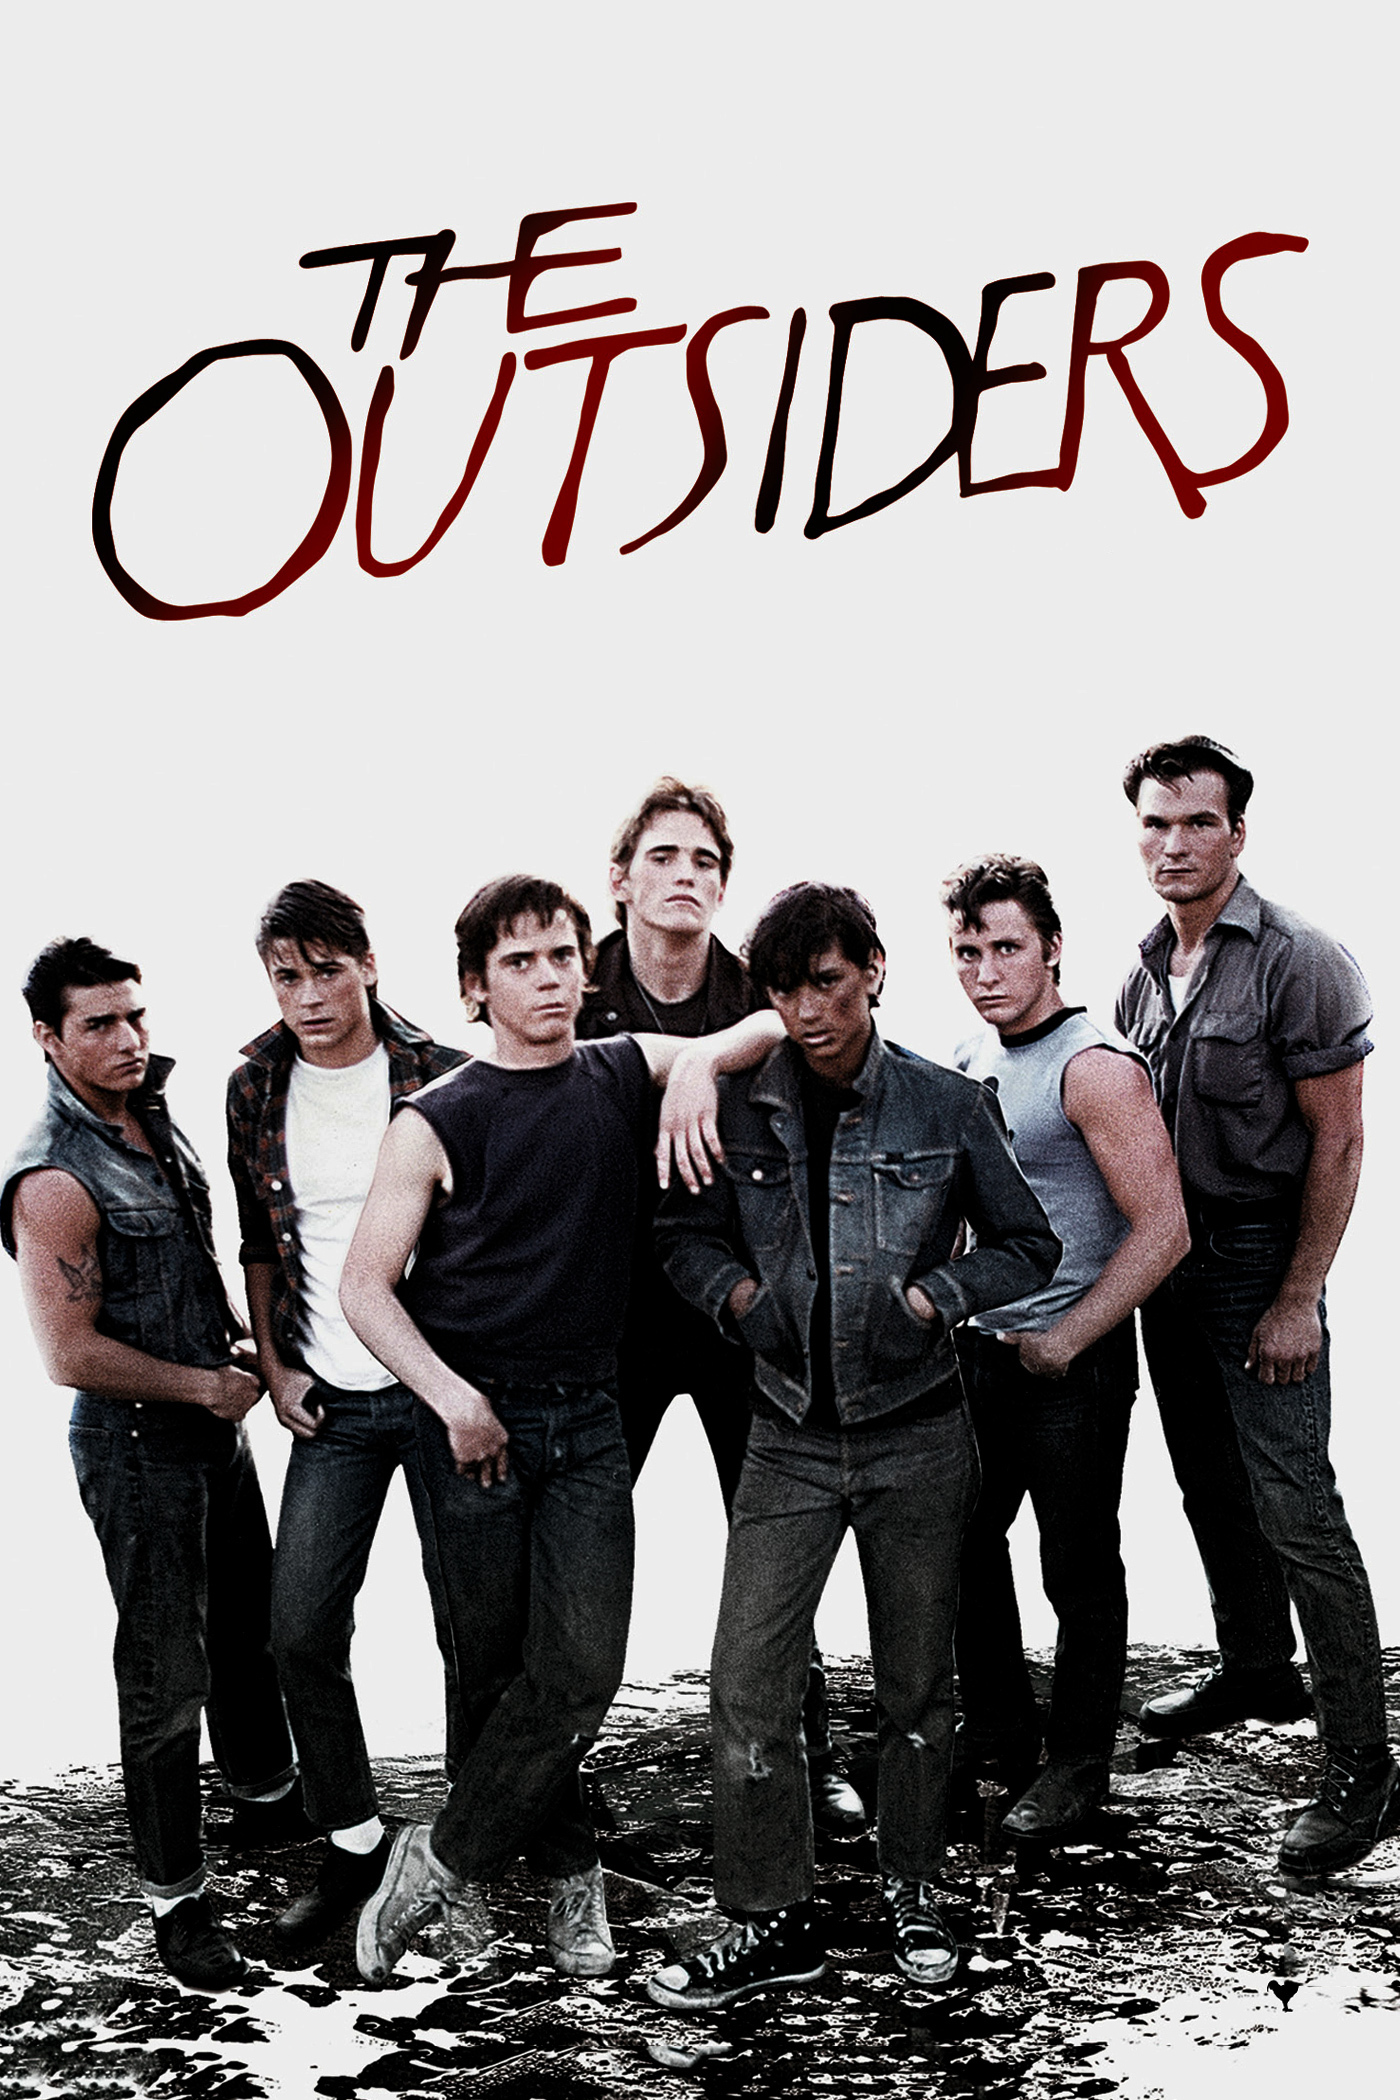 outsiders wallpaper,album cover,movie,poster,font